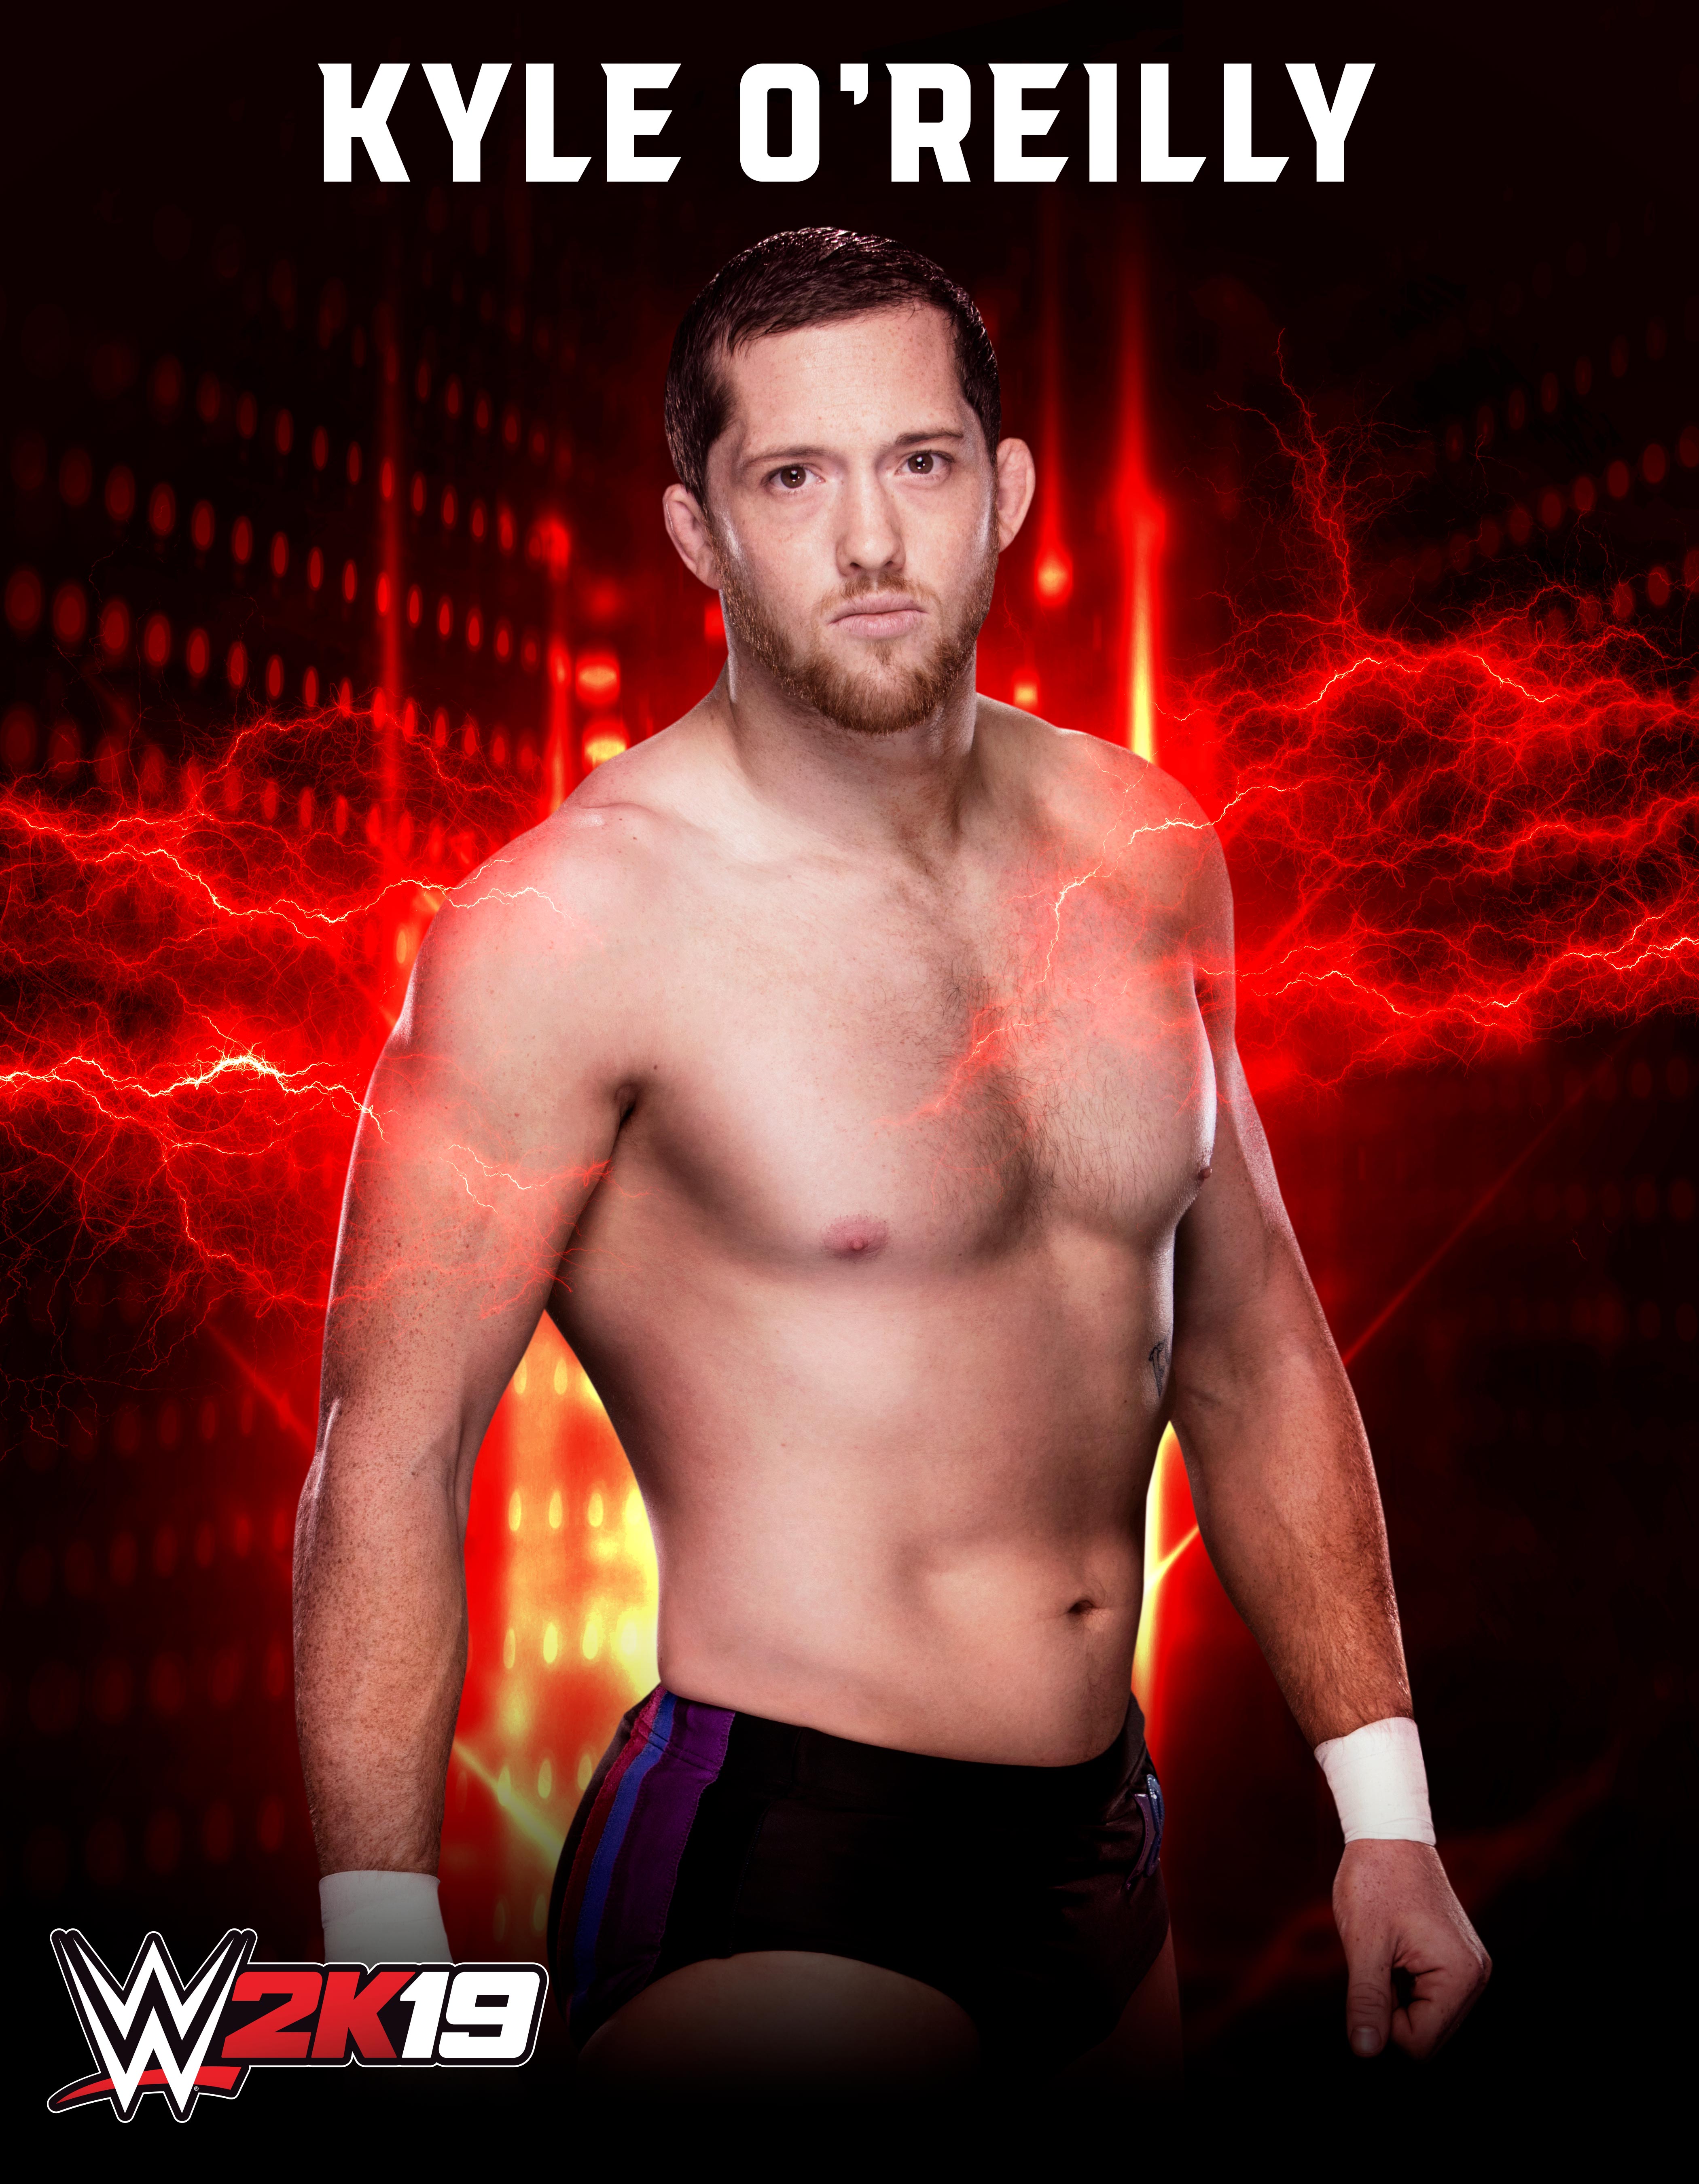 Wwe2k19 Roster Kyle Oreilly